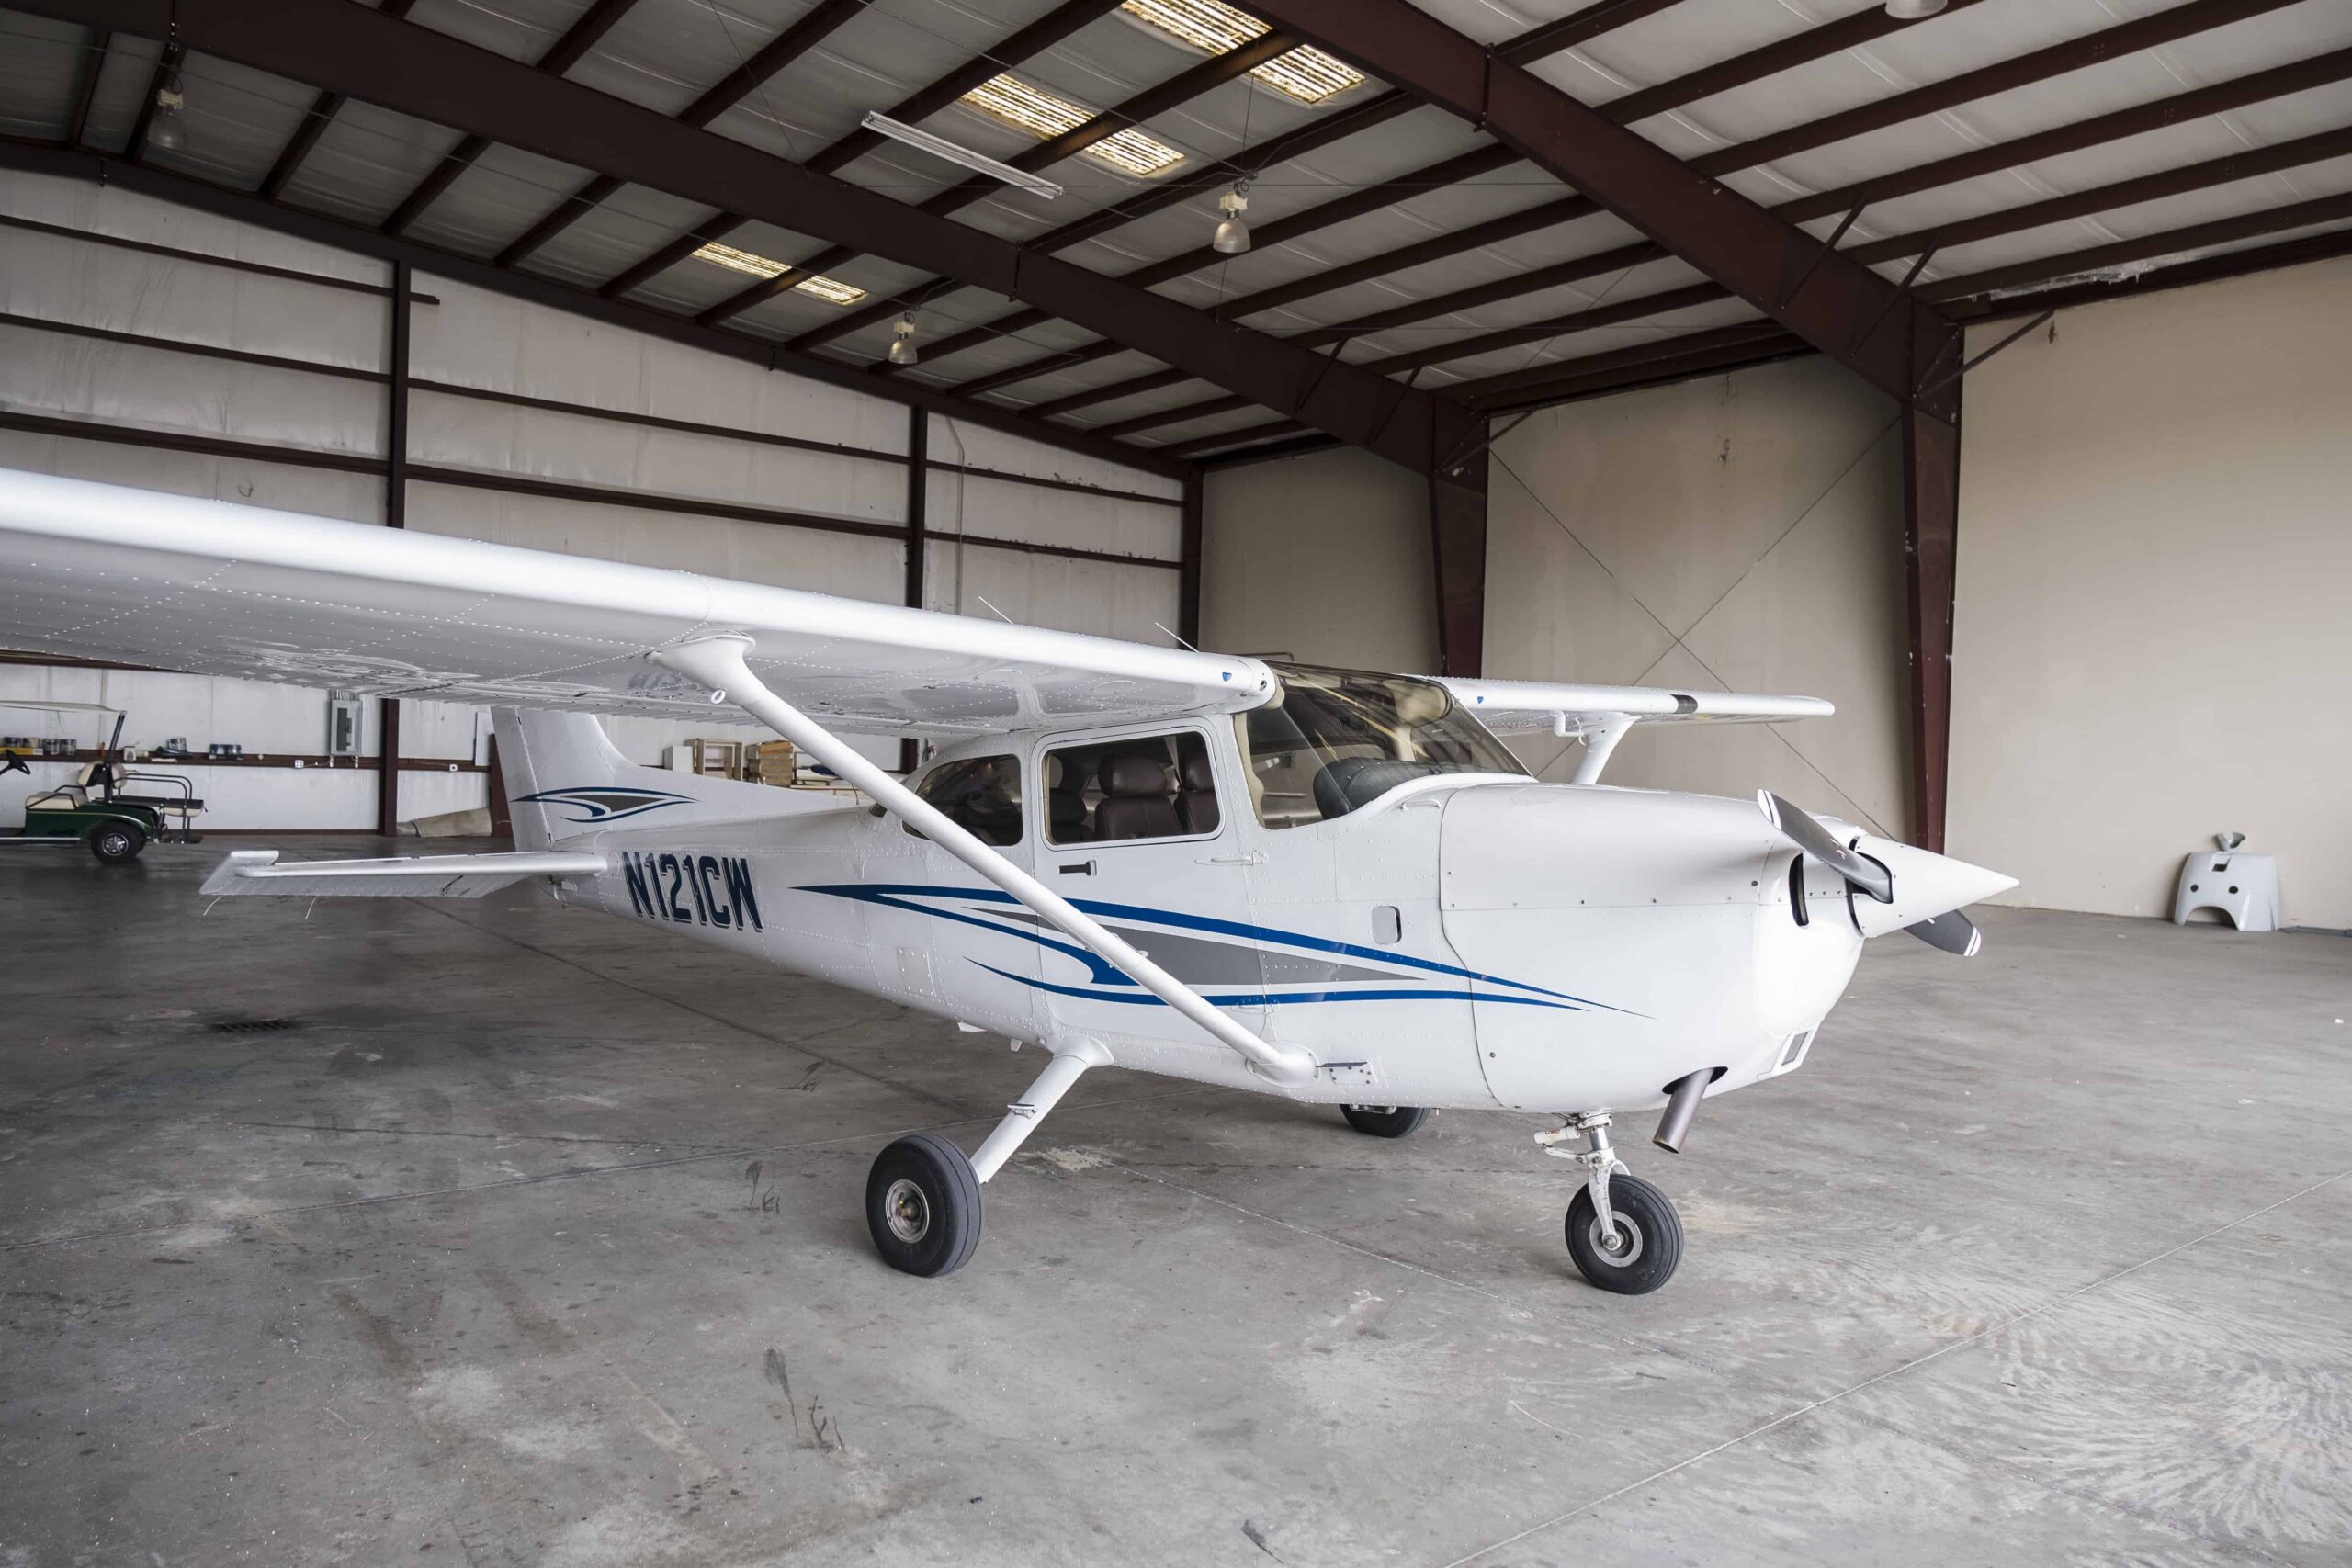 Rent this 172 at Kissimmee Airport 